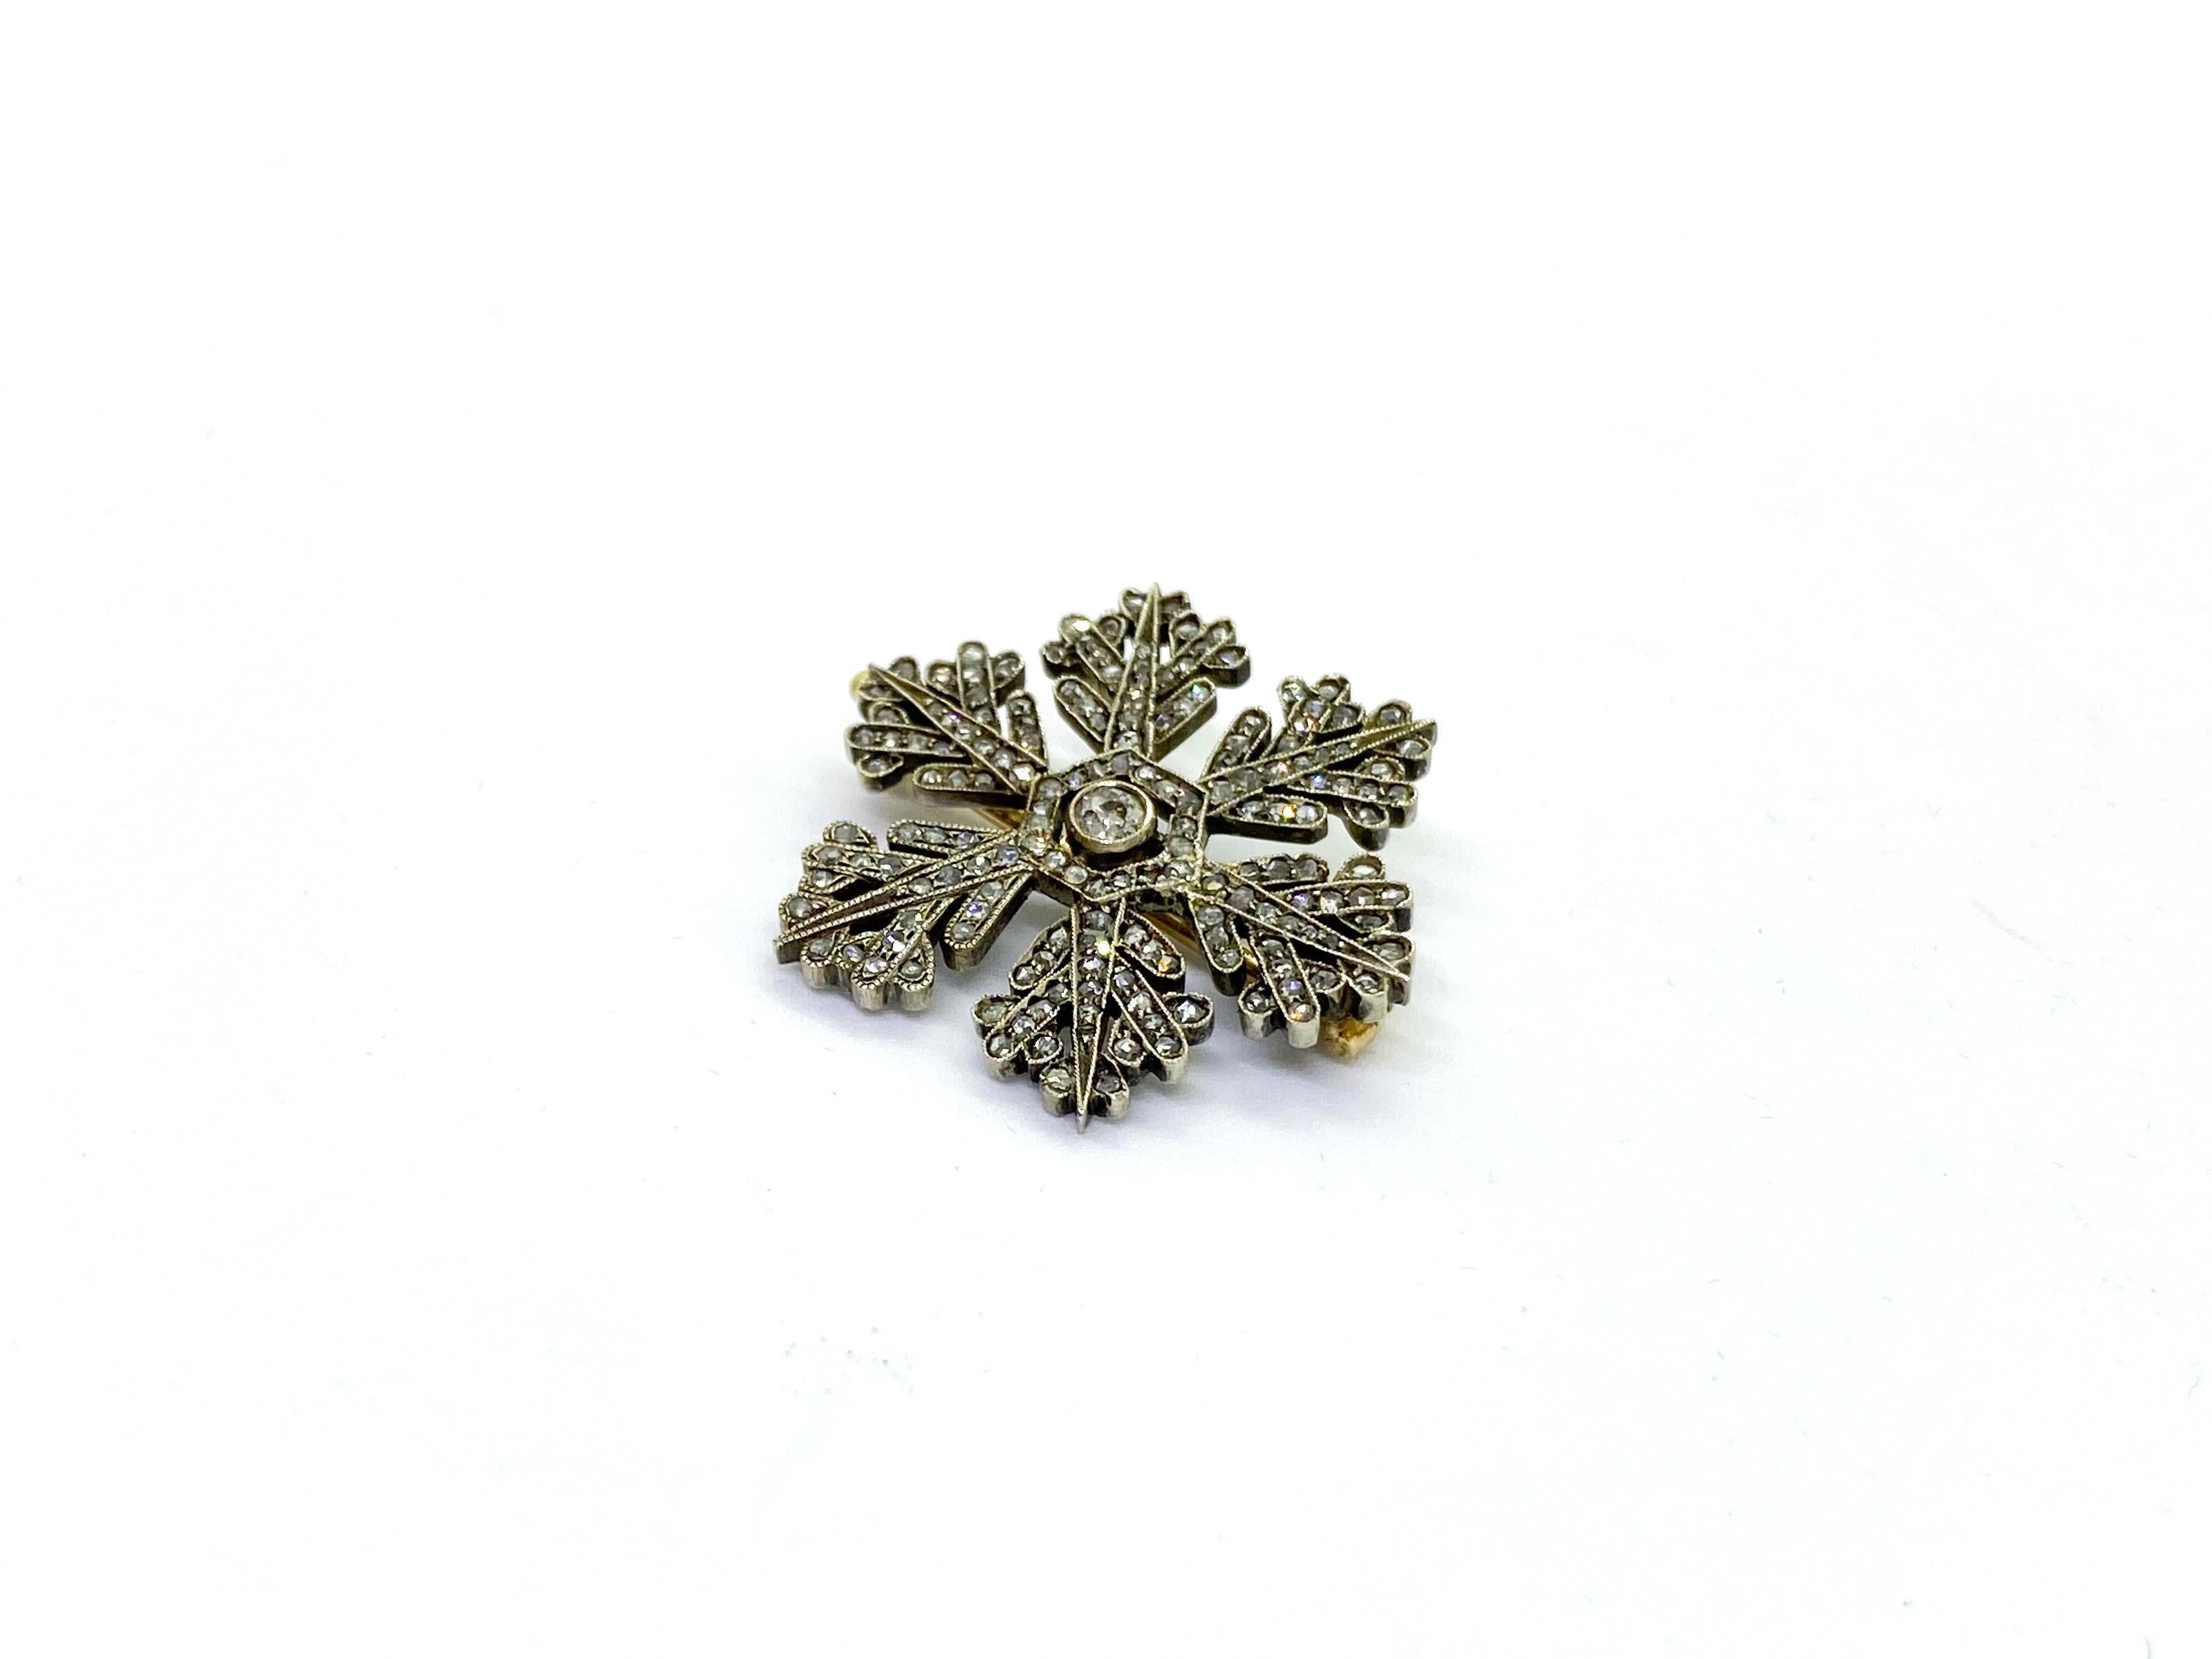 Silver and 14 Karat Yellow Gold Fabergé Diamond Snowflake Brooch
It is very rare for a snowflake brooch.
This jewelry comes from the Nobel Family Collection.
Last sold to Bukowski Sweden. Auction Jun 7, 2017. Important Spring Sale 601.
Catalog